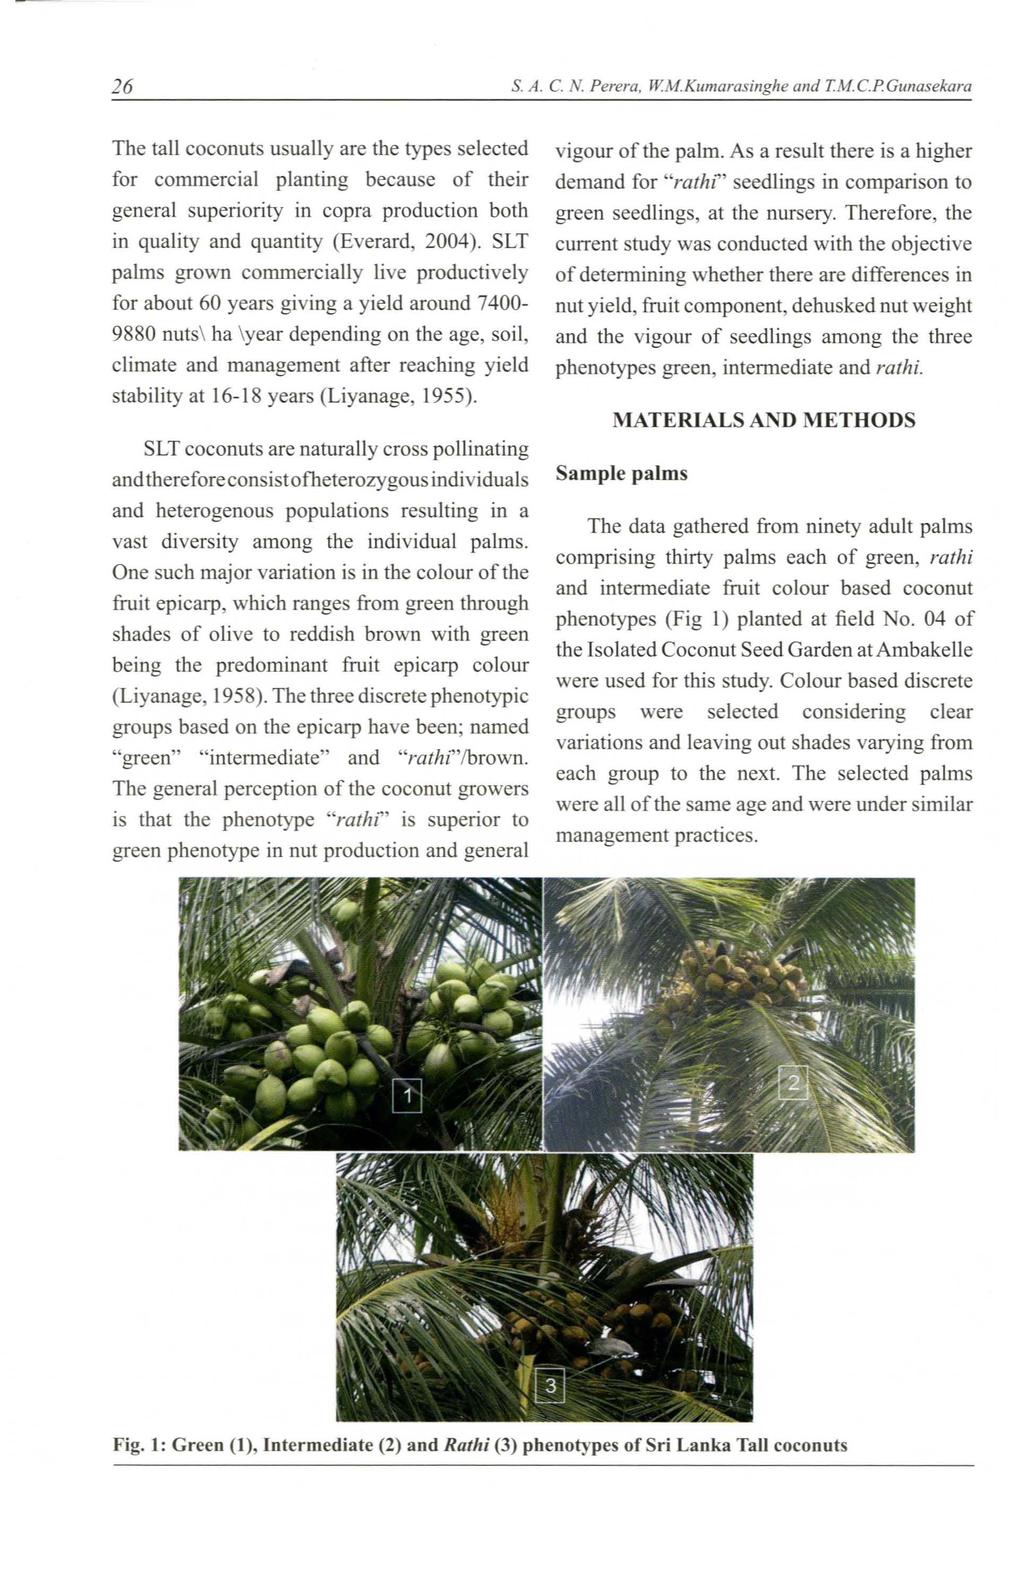 26 S. A. C. N. Perera, WM.Kumarasillghe alld T.M.C.PGlInasekara The tall coconuts usually are the types selected for commercial planting because of their general superiority in copra production both in quality and quantity (Everard, 2004).